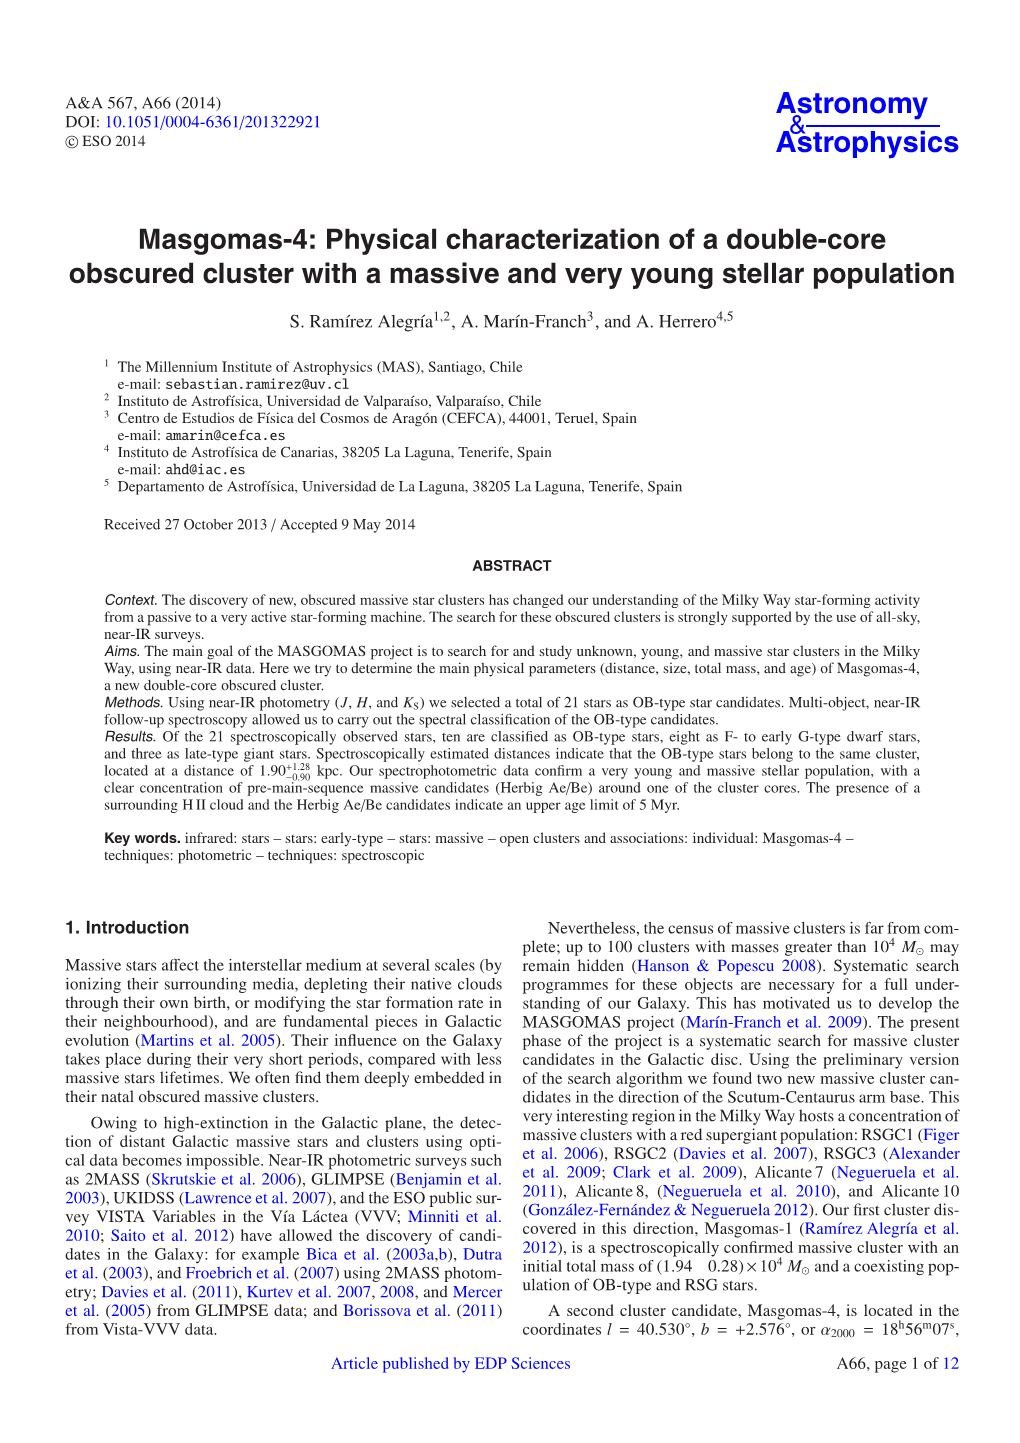 Masgomas-4: Physical Characterization of a Double-Core Obscured Cluster with a Massive and Very Young Stellar Population